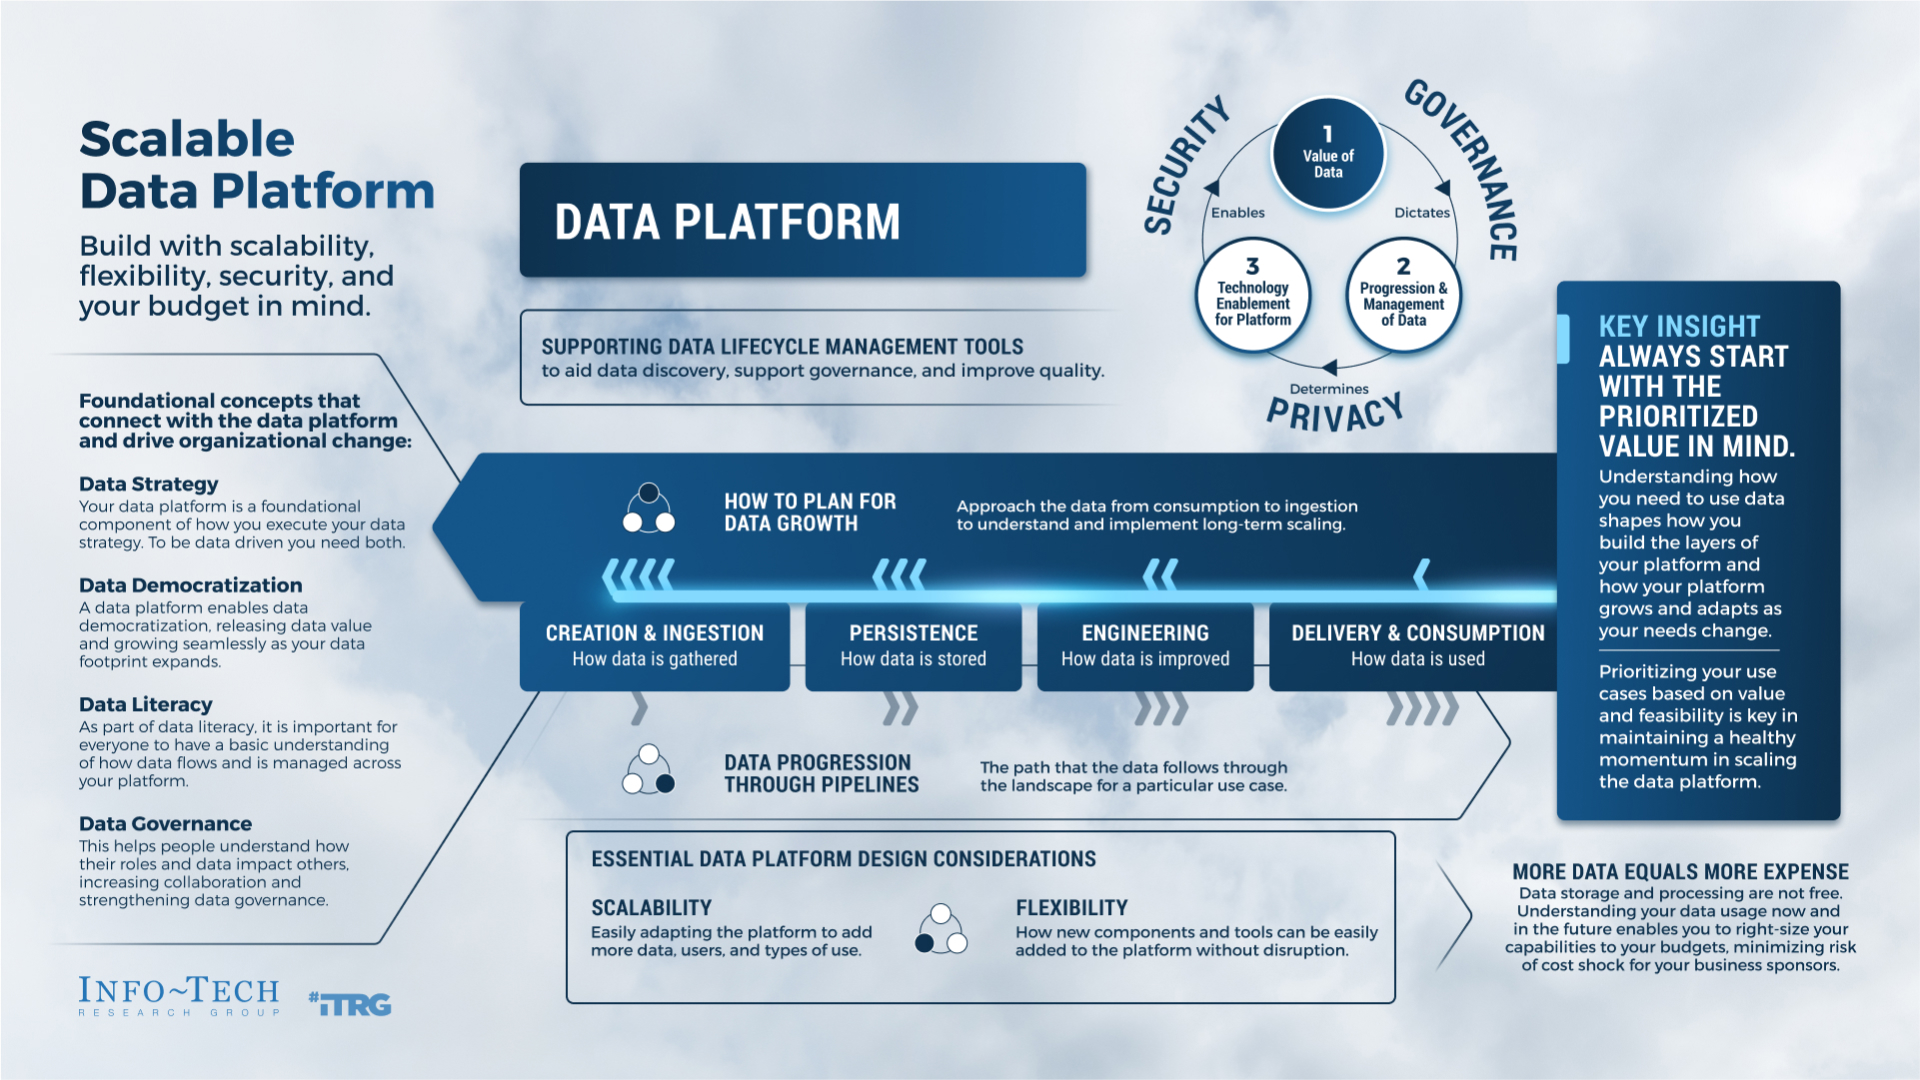 Scalable Data Platform Thought Model. Build with scalability, flexibility, security, and your budget in mind